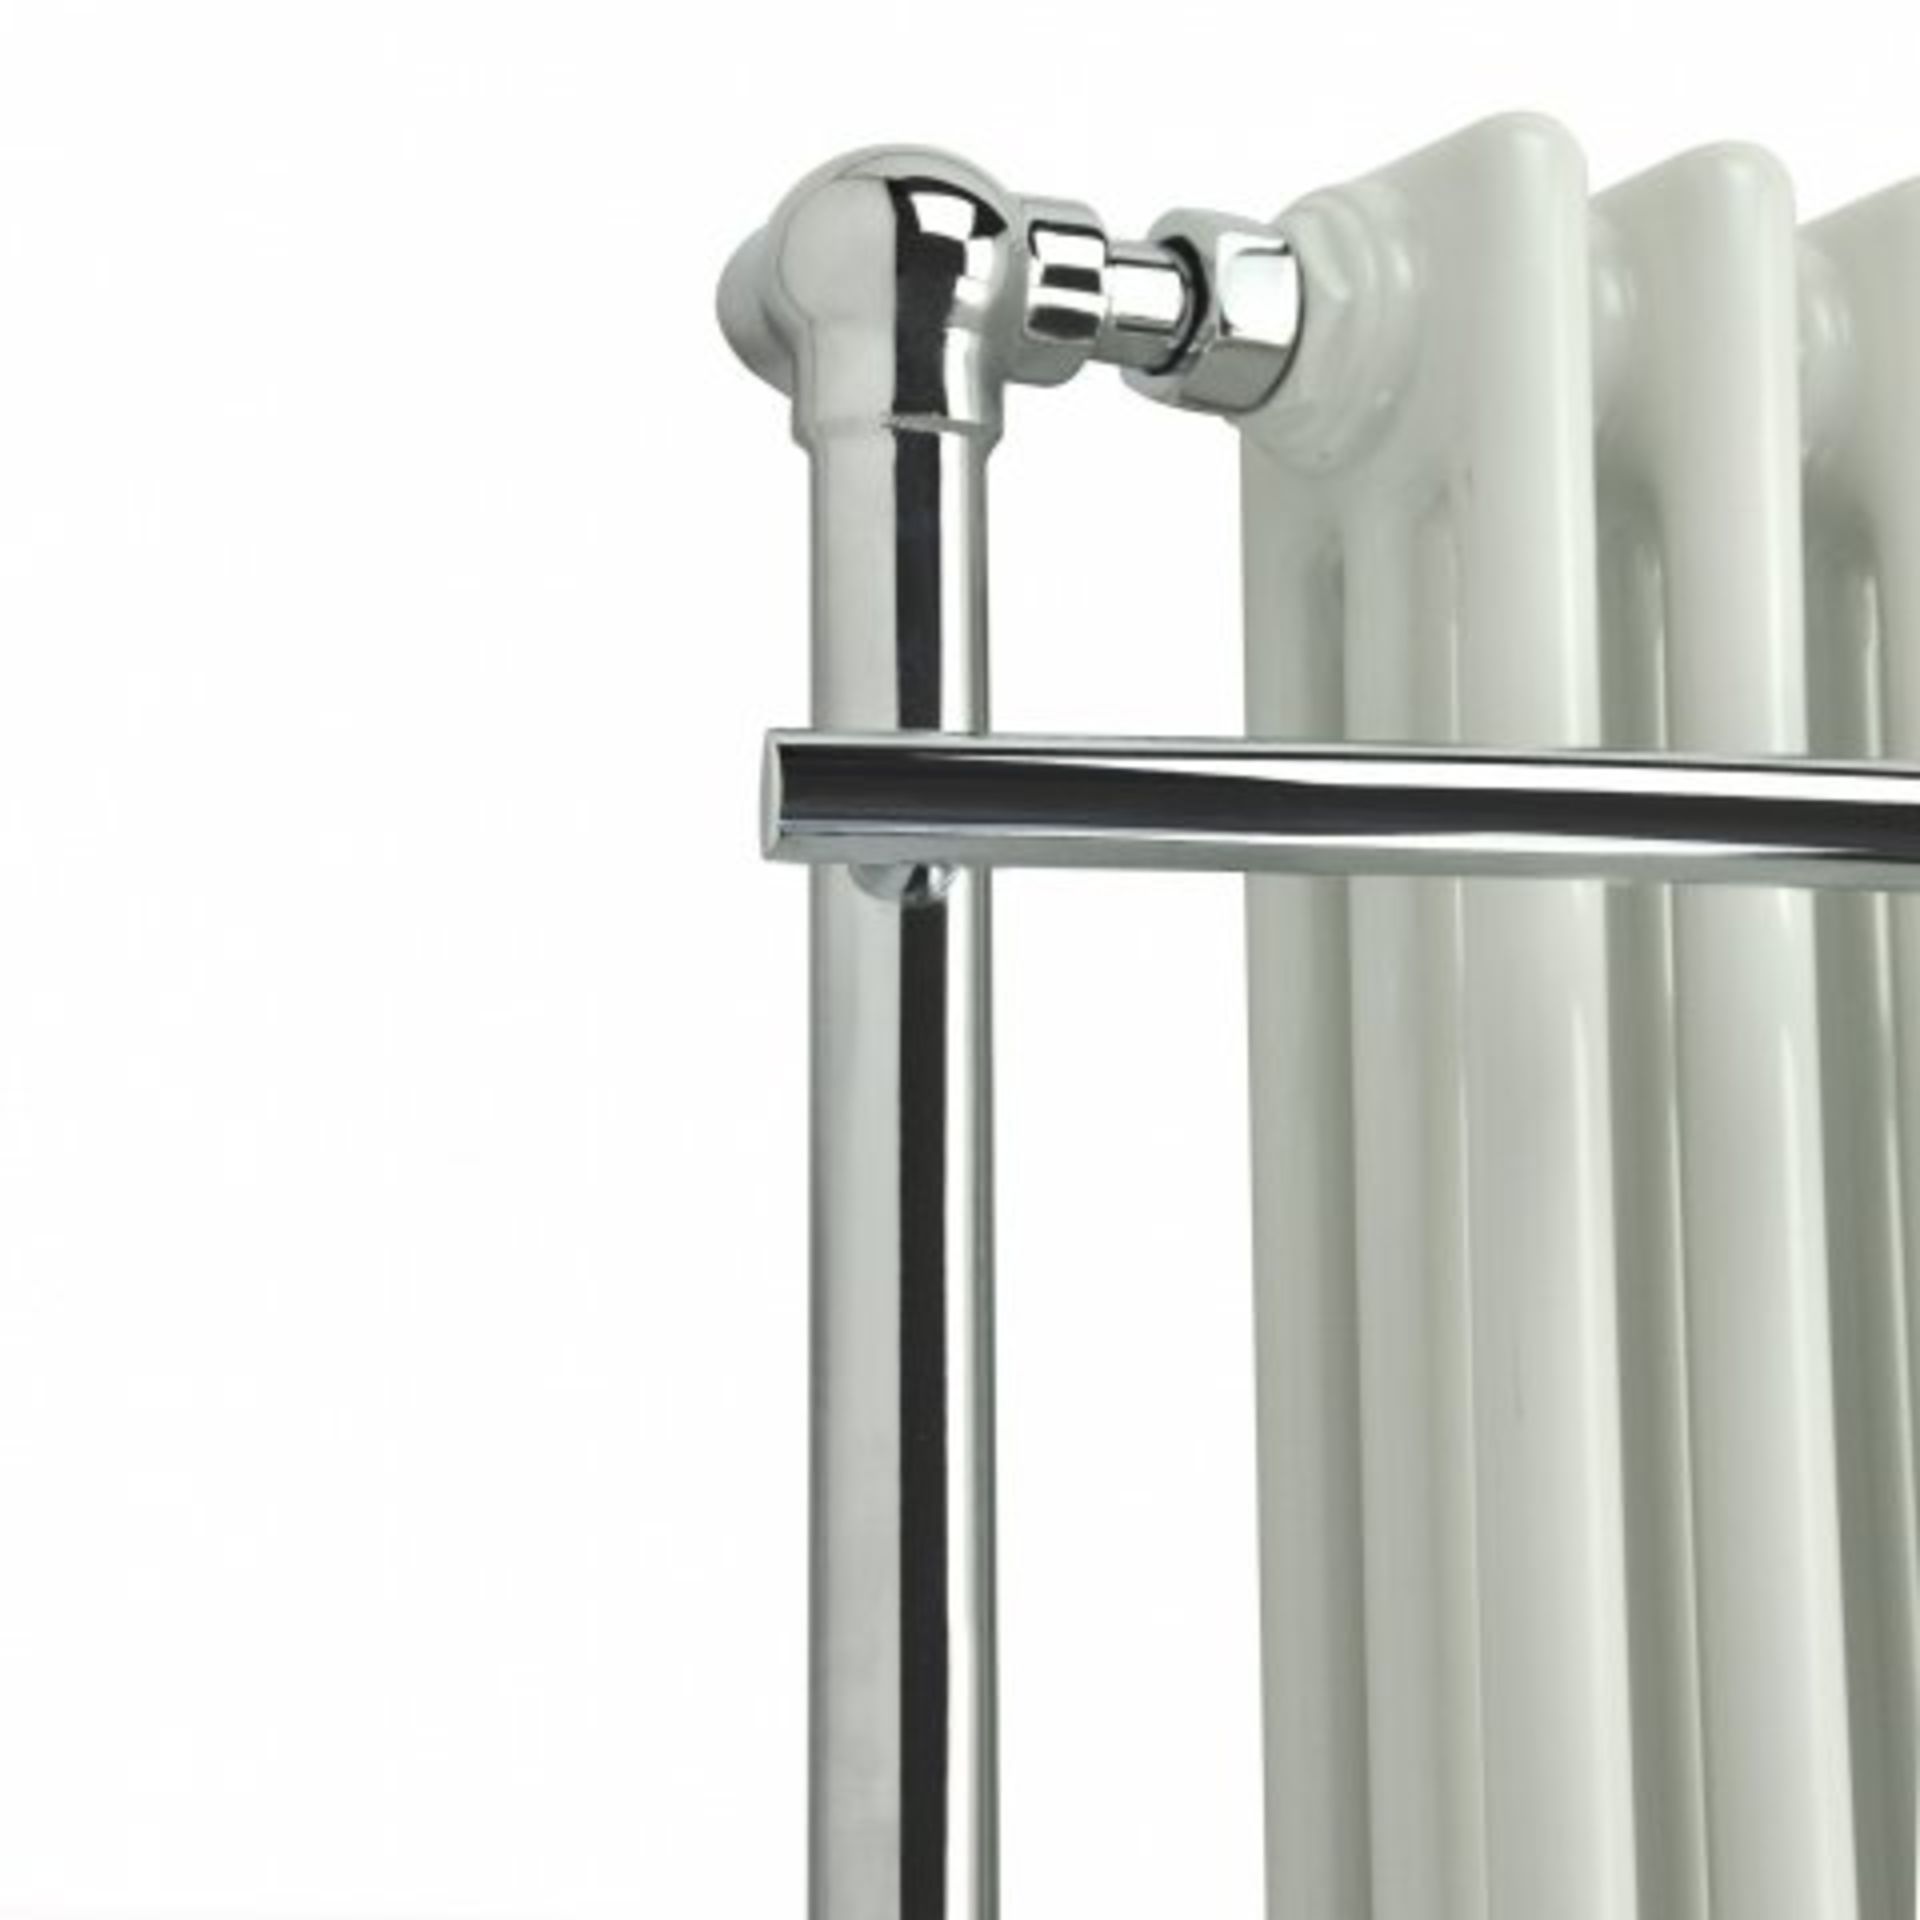 (H12) 1000x635mm Traditional White Wall Mounted Towel Rail Radiator - Victoria Premium. RRP £719.99. - Image 4 of 5